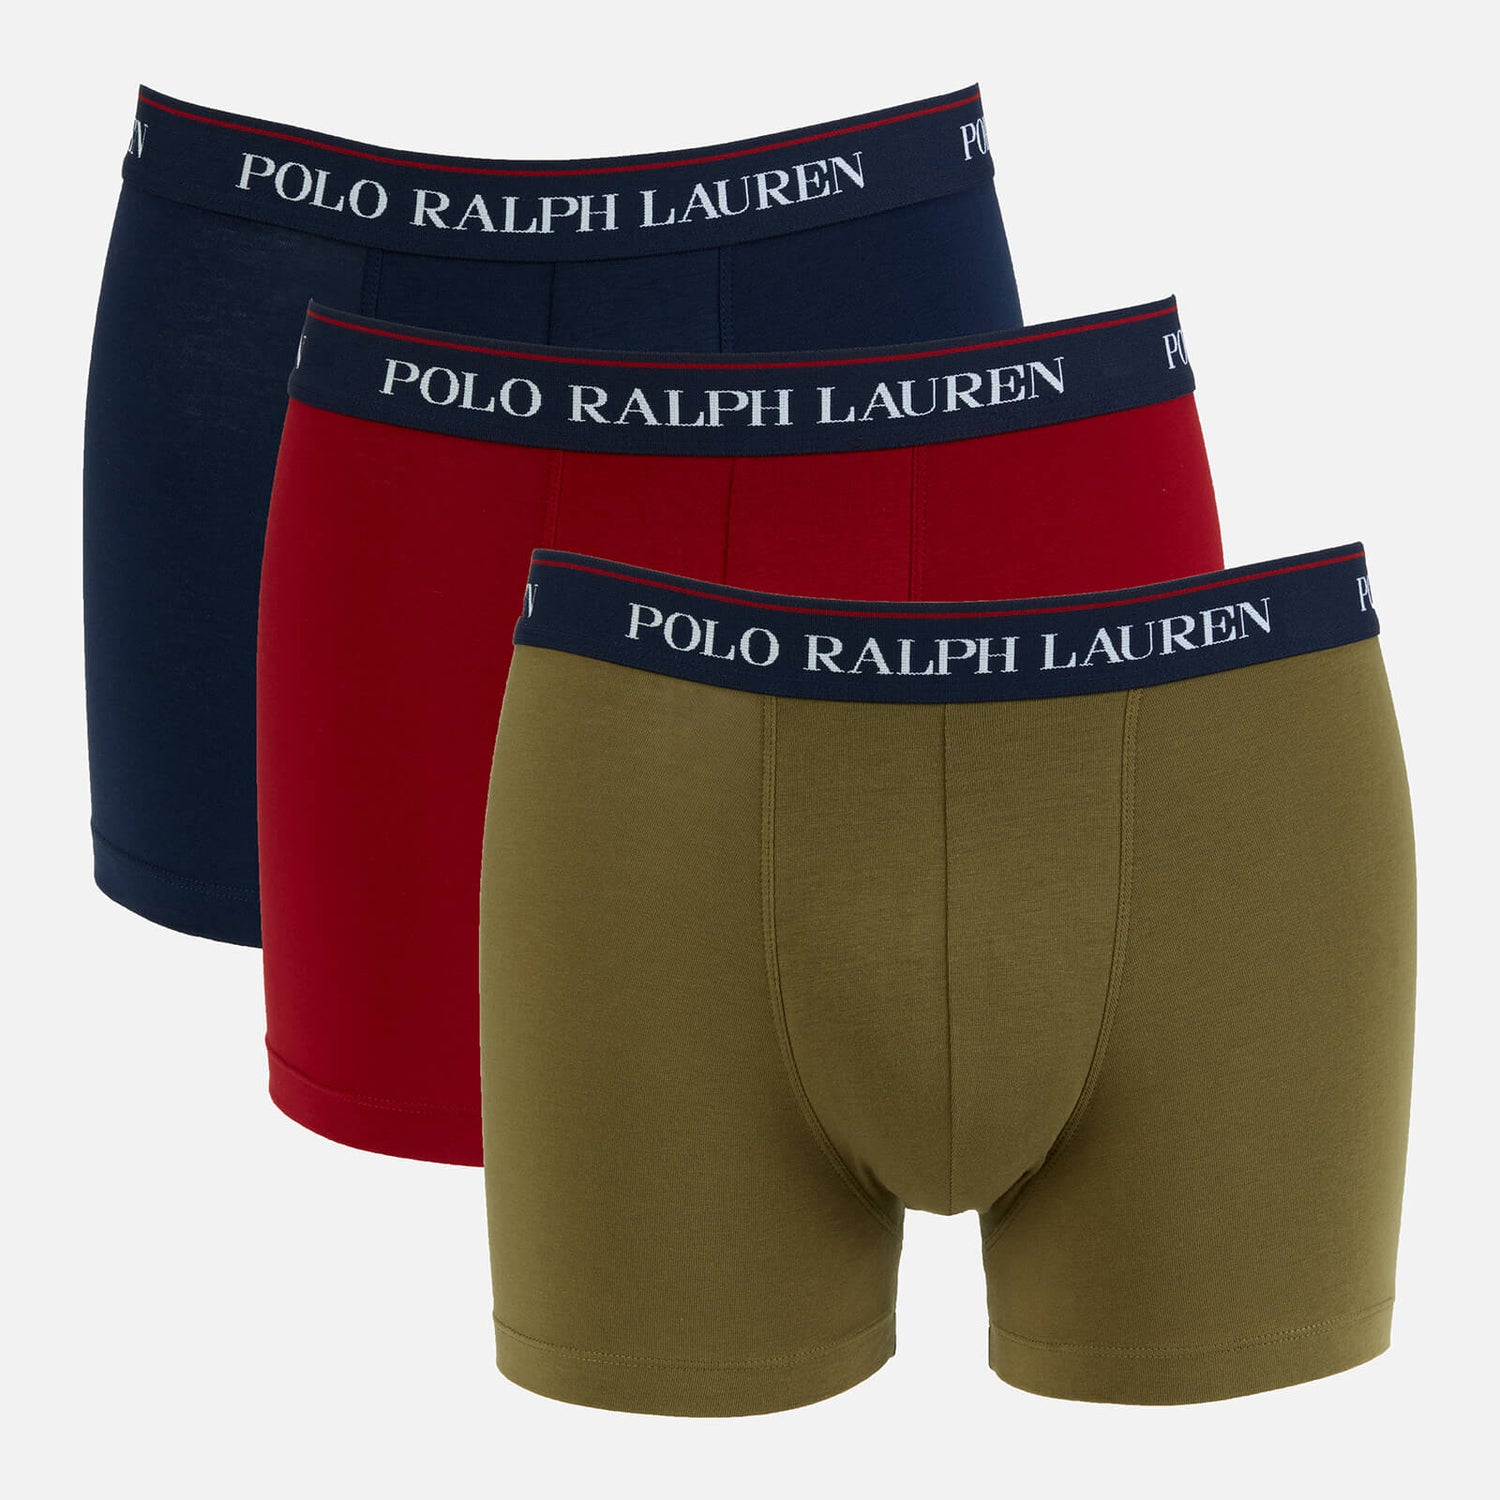 Polo Ralph Lauren Men's 3-Pack Classic Trunk Boxer Shorts - Navy/Red/Olive